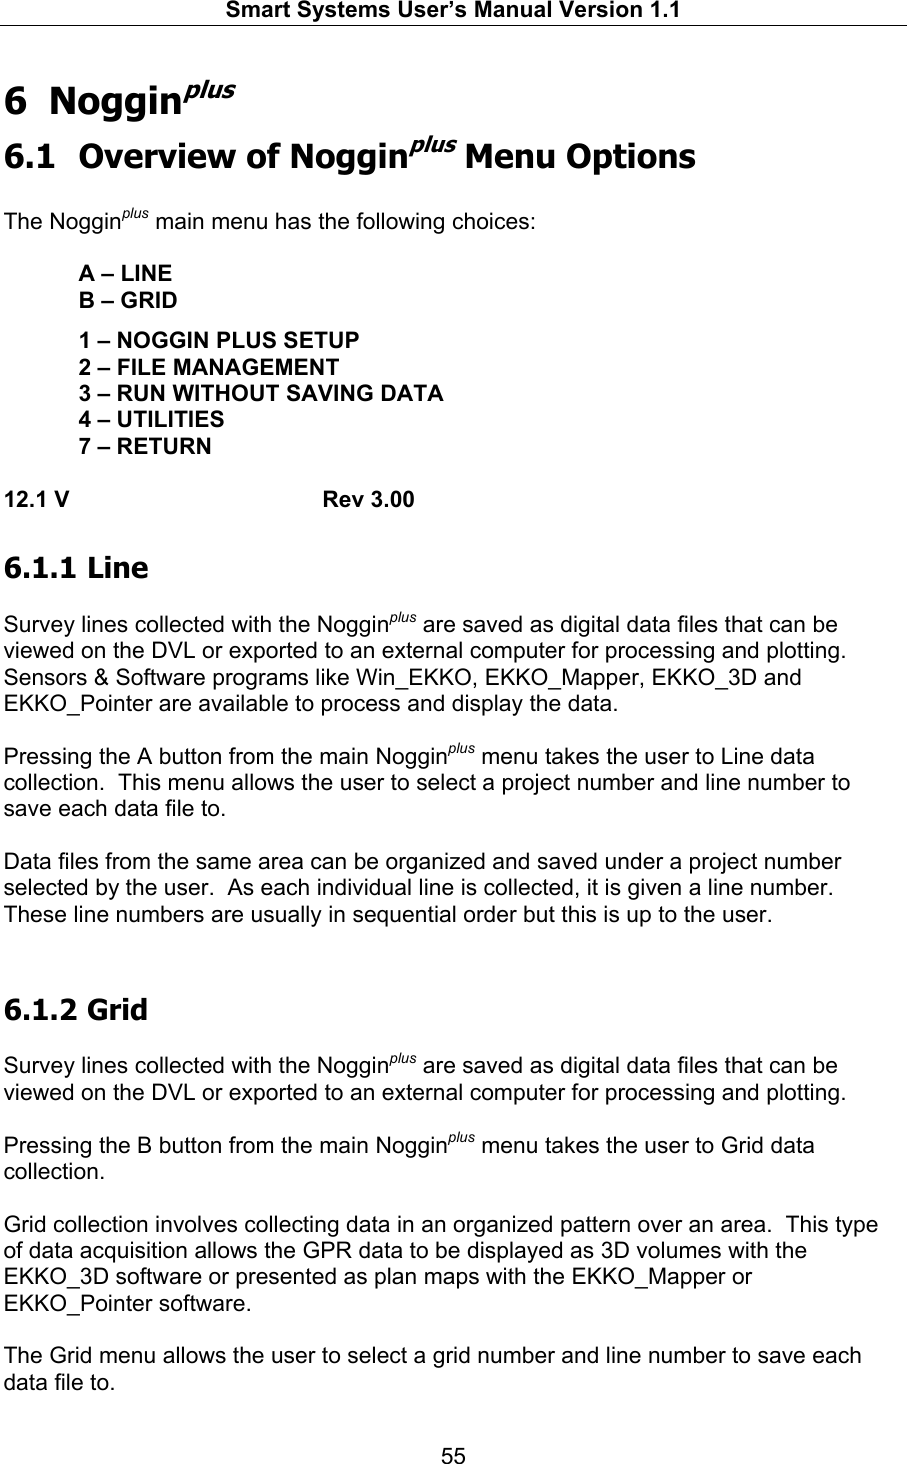   Smart Systems User’s Manual Version 1.1  55  6 Nogginplus 6.1 Overview of Nogginplus Menu Options  The Nogginplus main menu has the following choices:    A – LINE   B – GRID    1 – NOGGIN PLUS SETUP   2 – FILE MANAGEMENT   3 – RUN WITHOUT SAVING DATA   4 – UTILITIES   7 – RETURN  12.1 V    Rev 3.00 6.1.1  Line  Survey lines collected with the Nogginplus are saved as digital data files that can be viewed on the DVL or exported to an external computer for processing and plotting.  Sensors &amp; Software programs like Win_EKKO, EKKO_Mapper, EKKO_3D and EKKO_Pointer are available to process and display the data.  Pressing the A button from the main Nogginplus menu takes the user to Line data collection.  This menu allows the user to select a project number and line number to save each data file to.  Data files from the same area can be organized and saved under a project number selected by the user.  As each individual line is collected, it is given a line number. These line numbers are usually in sequential order but this is up to the user.    6.1.2  Grid  Survey lines collected with the Nogginplus are saved as digital data files that can be viewed on the DVL or exported to an external computer for processing and plotting.    Pressing the B button from the main Nogginplus menu takes the user to Grid data collection.    Grid collection involves collecting data in an organized pattern over an area.  This type of data acquisition allows the GPR data to be displayed as 3D volumes with the EKKO_3D software or presented as plan maps with the EKKO_Mapper or EKKO_Pointer software.  The Grid menu allows the user to select a grid number and line number to save each data file to. 